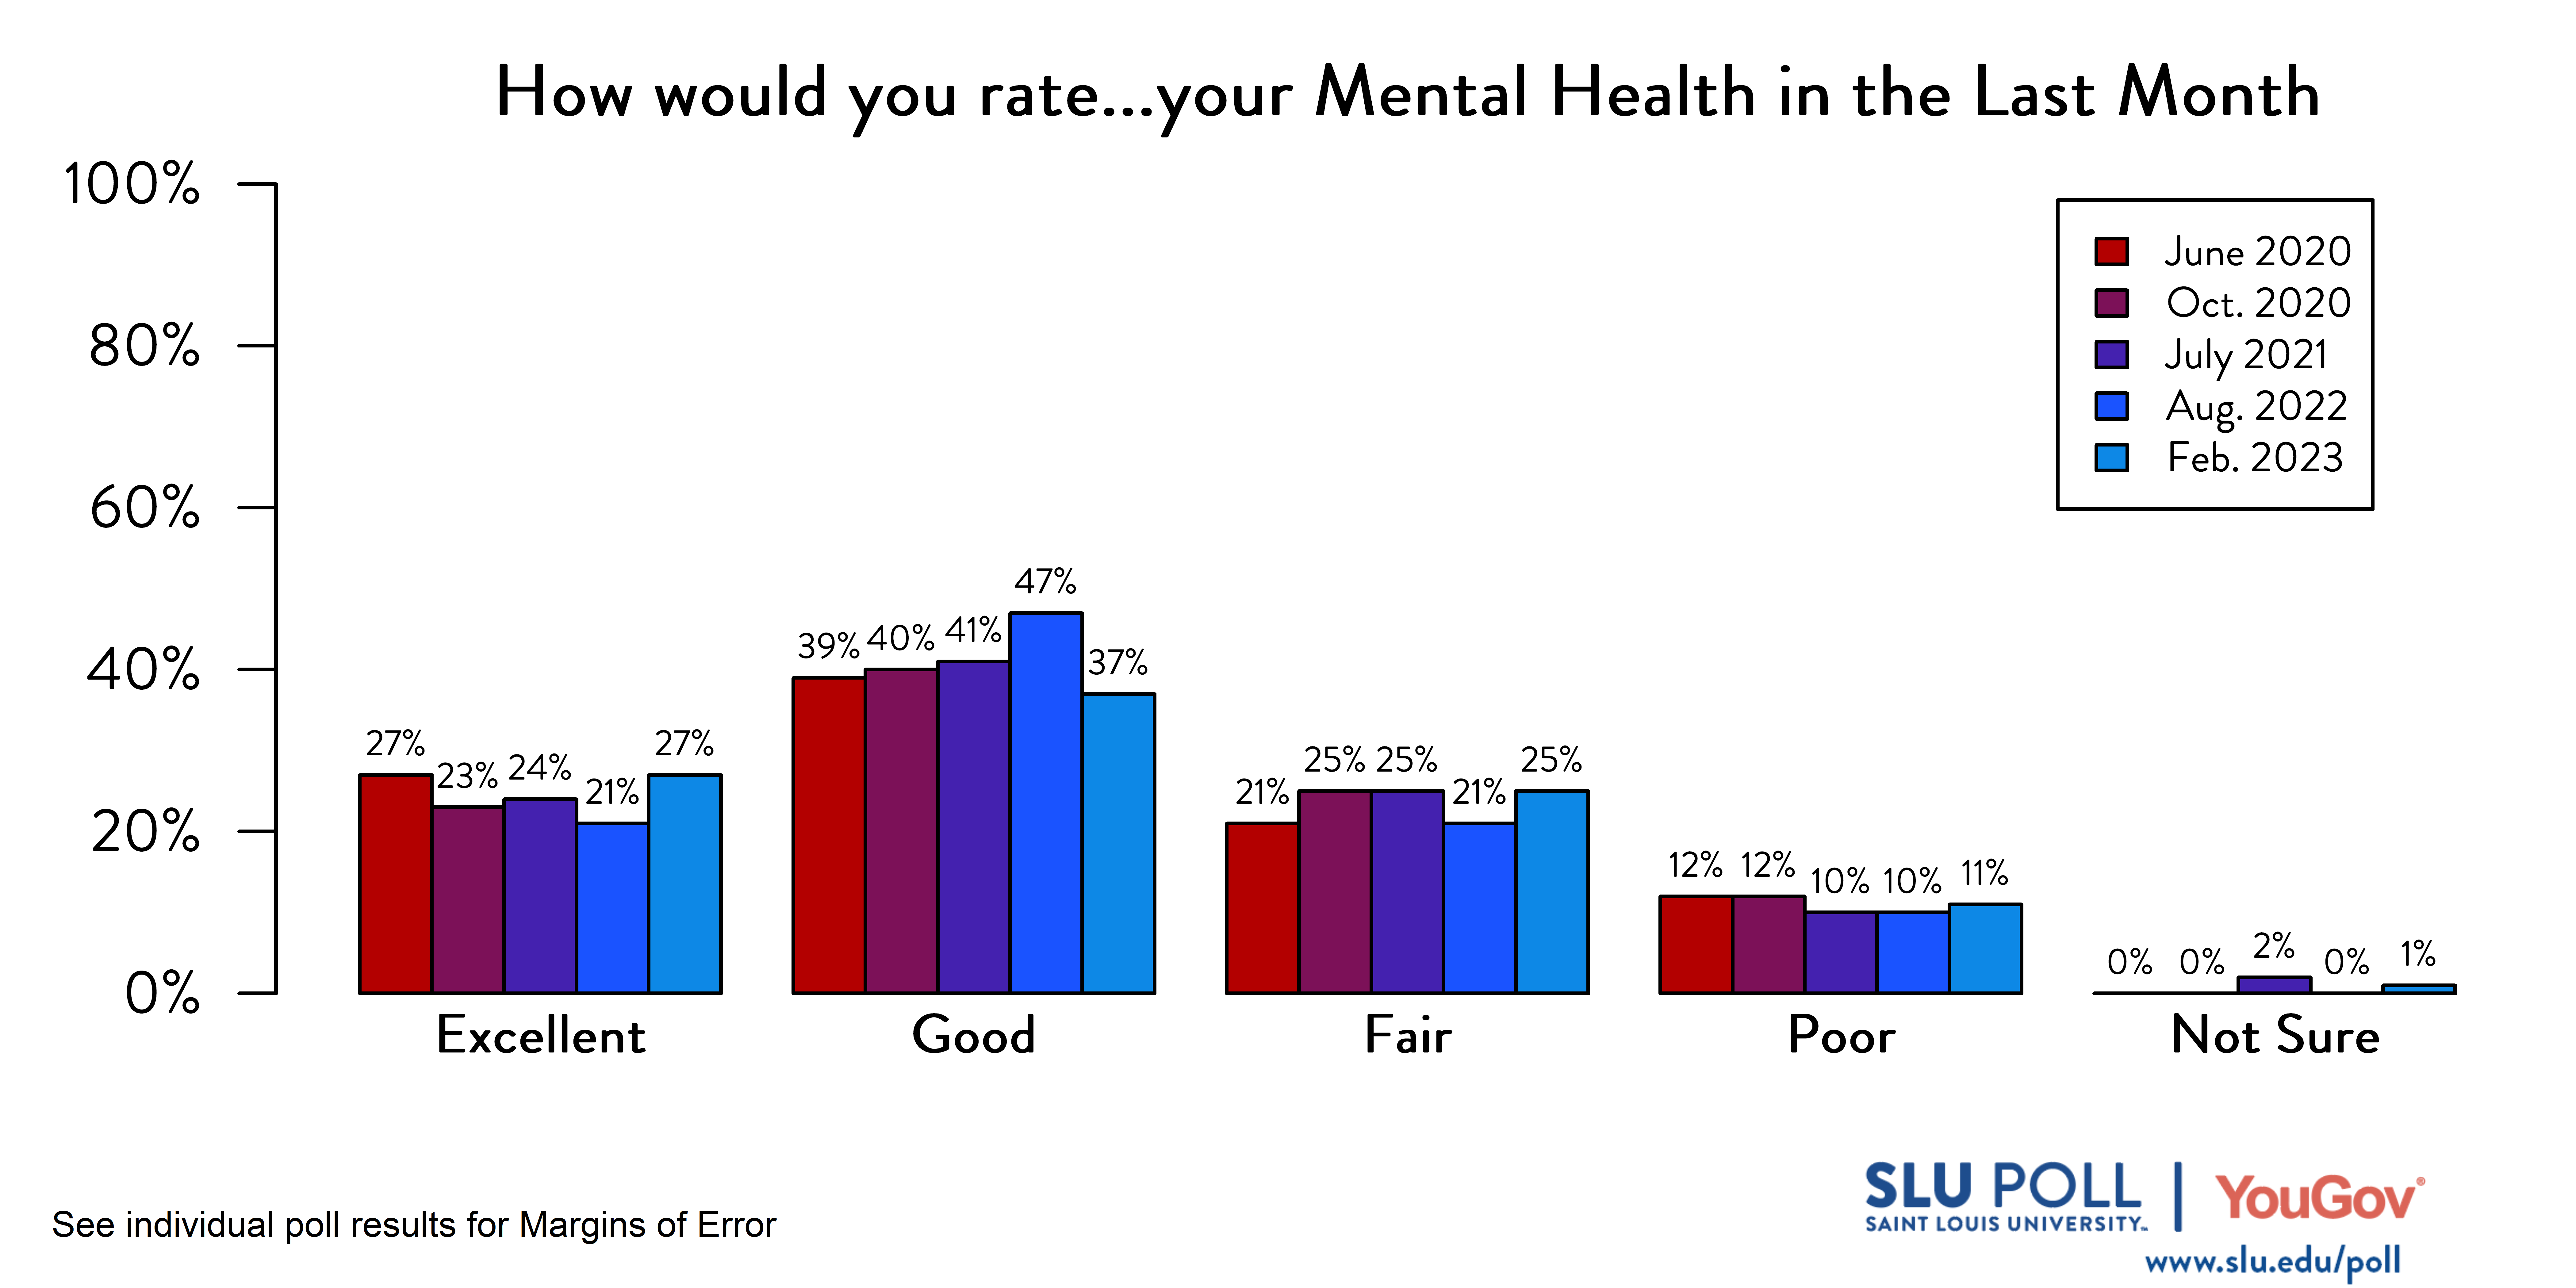 Likely voters' responses to 'How would you rate the condition of the following: Your mental health in the last month?'. June 2020 Voter Responses 27% Excellent, 39% Good, 21% Fair, 12% Poor, and 0% Not sure. October 2020 Voter Responses: 23% Excellent, 40% Good, 25% Fair, 12% Poor, and 0% Not sure. July 2021 Voter Responses: 24% Excellent, 41% Good, 25% Fair, 10% Poor, and 2% Not sure. August 2022 Voter Responses: 21% Excellent, 47% Good, 21% Fair, 10% Poor, and 0% Not sure. Februrary 2023 Voter Responses: 27% Excellent, 37% Good, 25% Fair, 11% Poor, and 1% Not sure.